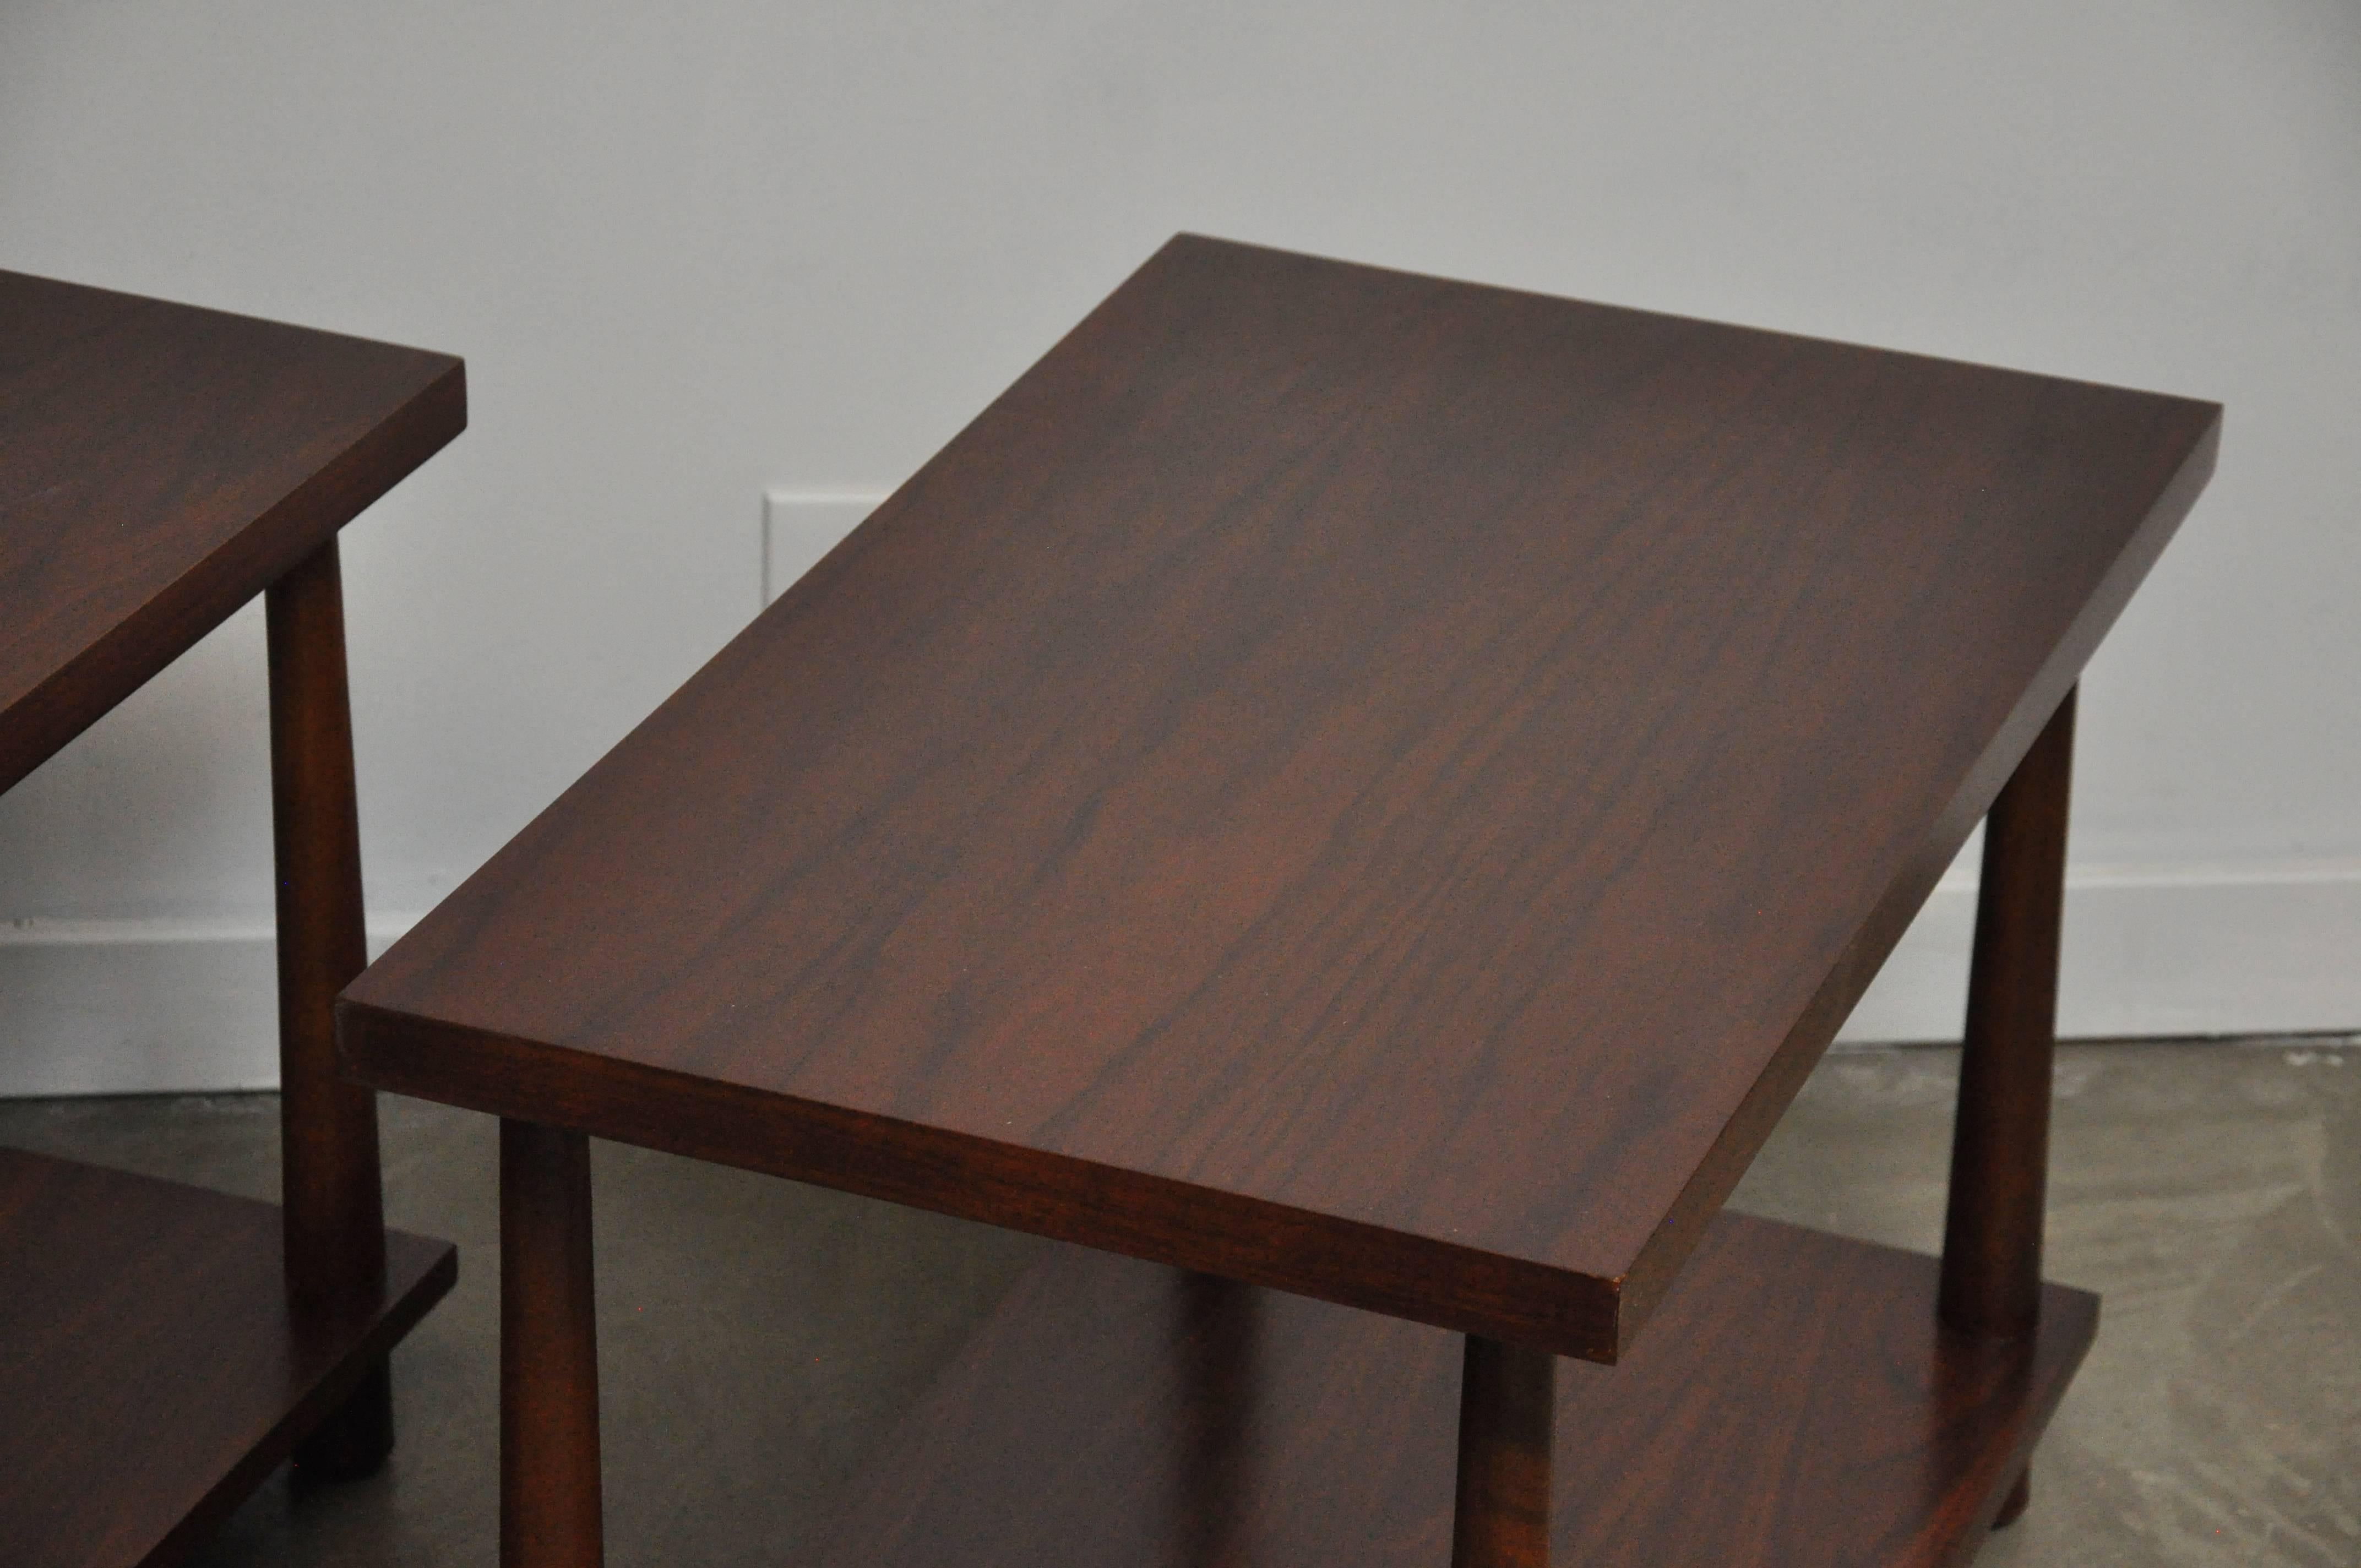 Pair of refinished walnut finish end tables by T.H. Robsjohn-Gibbings. Beautiful natural wood grain.